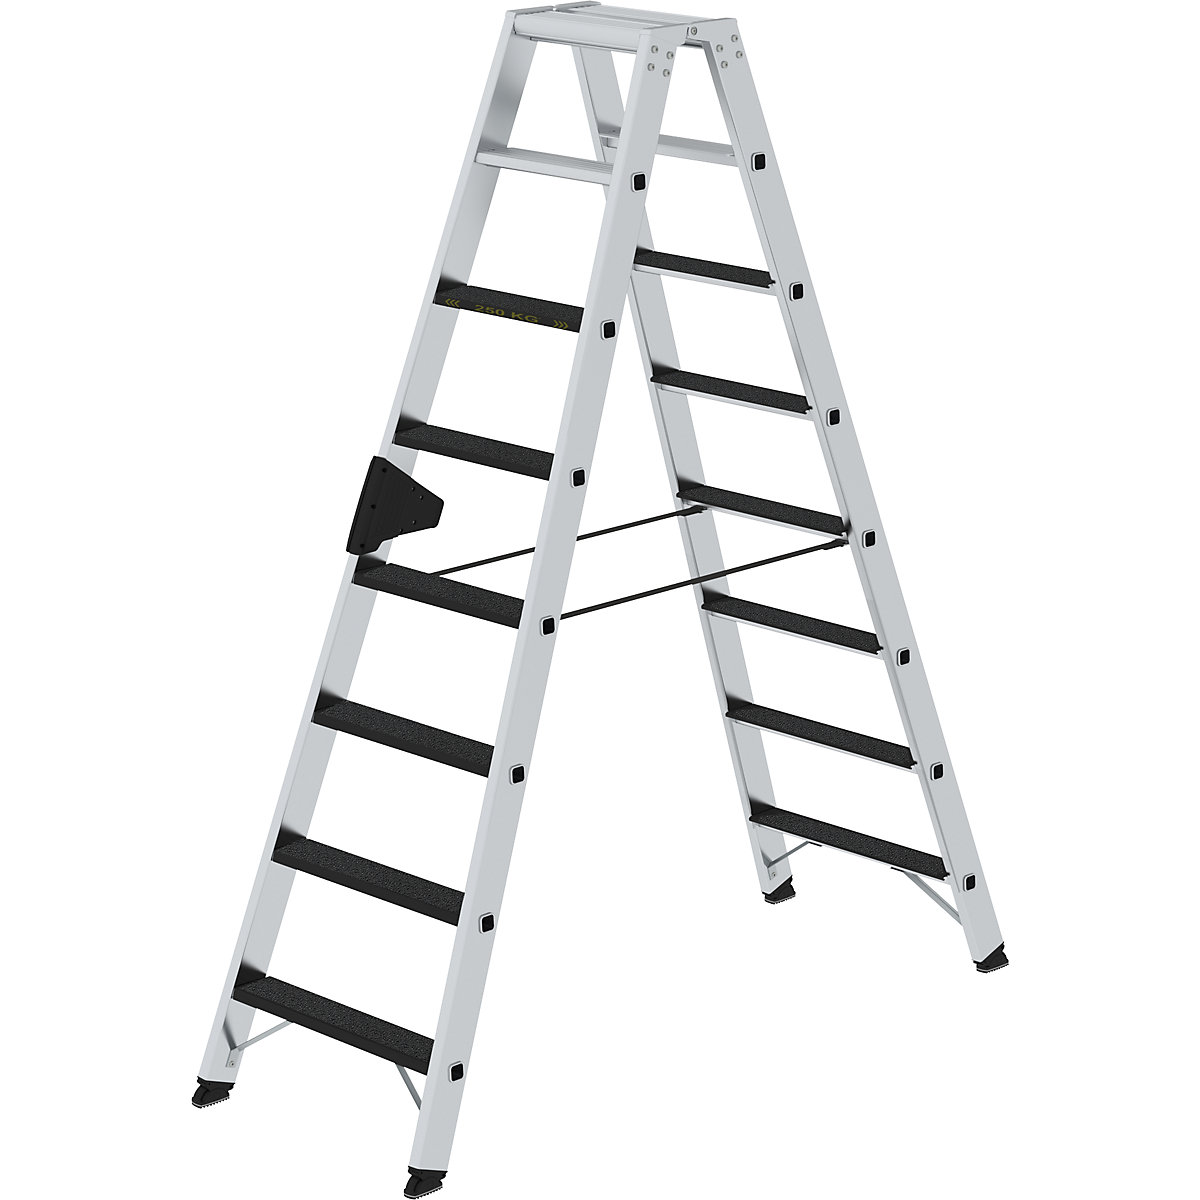 CLIP-STEP step ladder – MUNK, double sided access, slip resistant R13, heavy duty, 2 x 8 steps-7